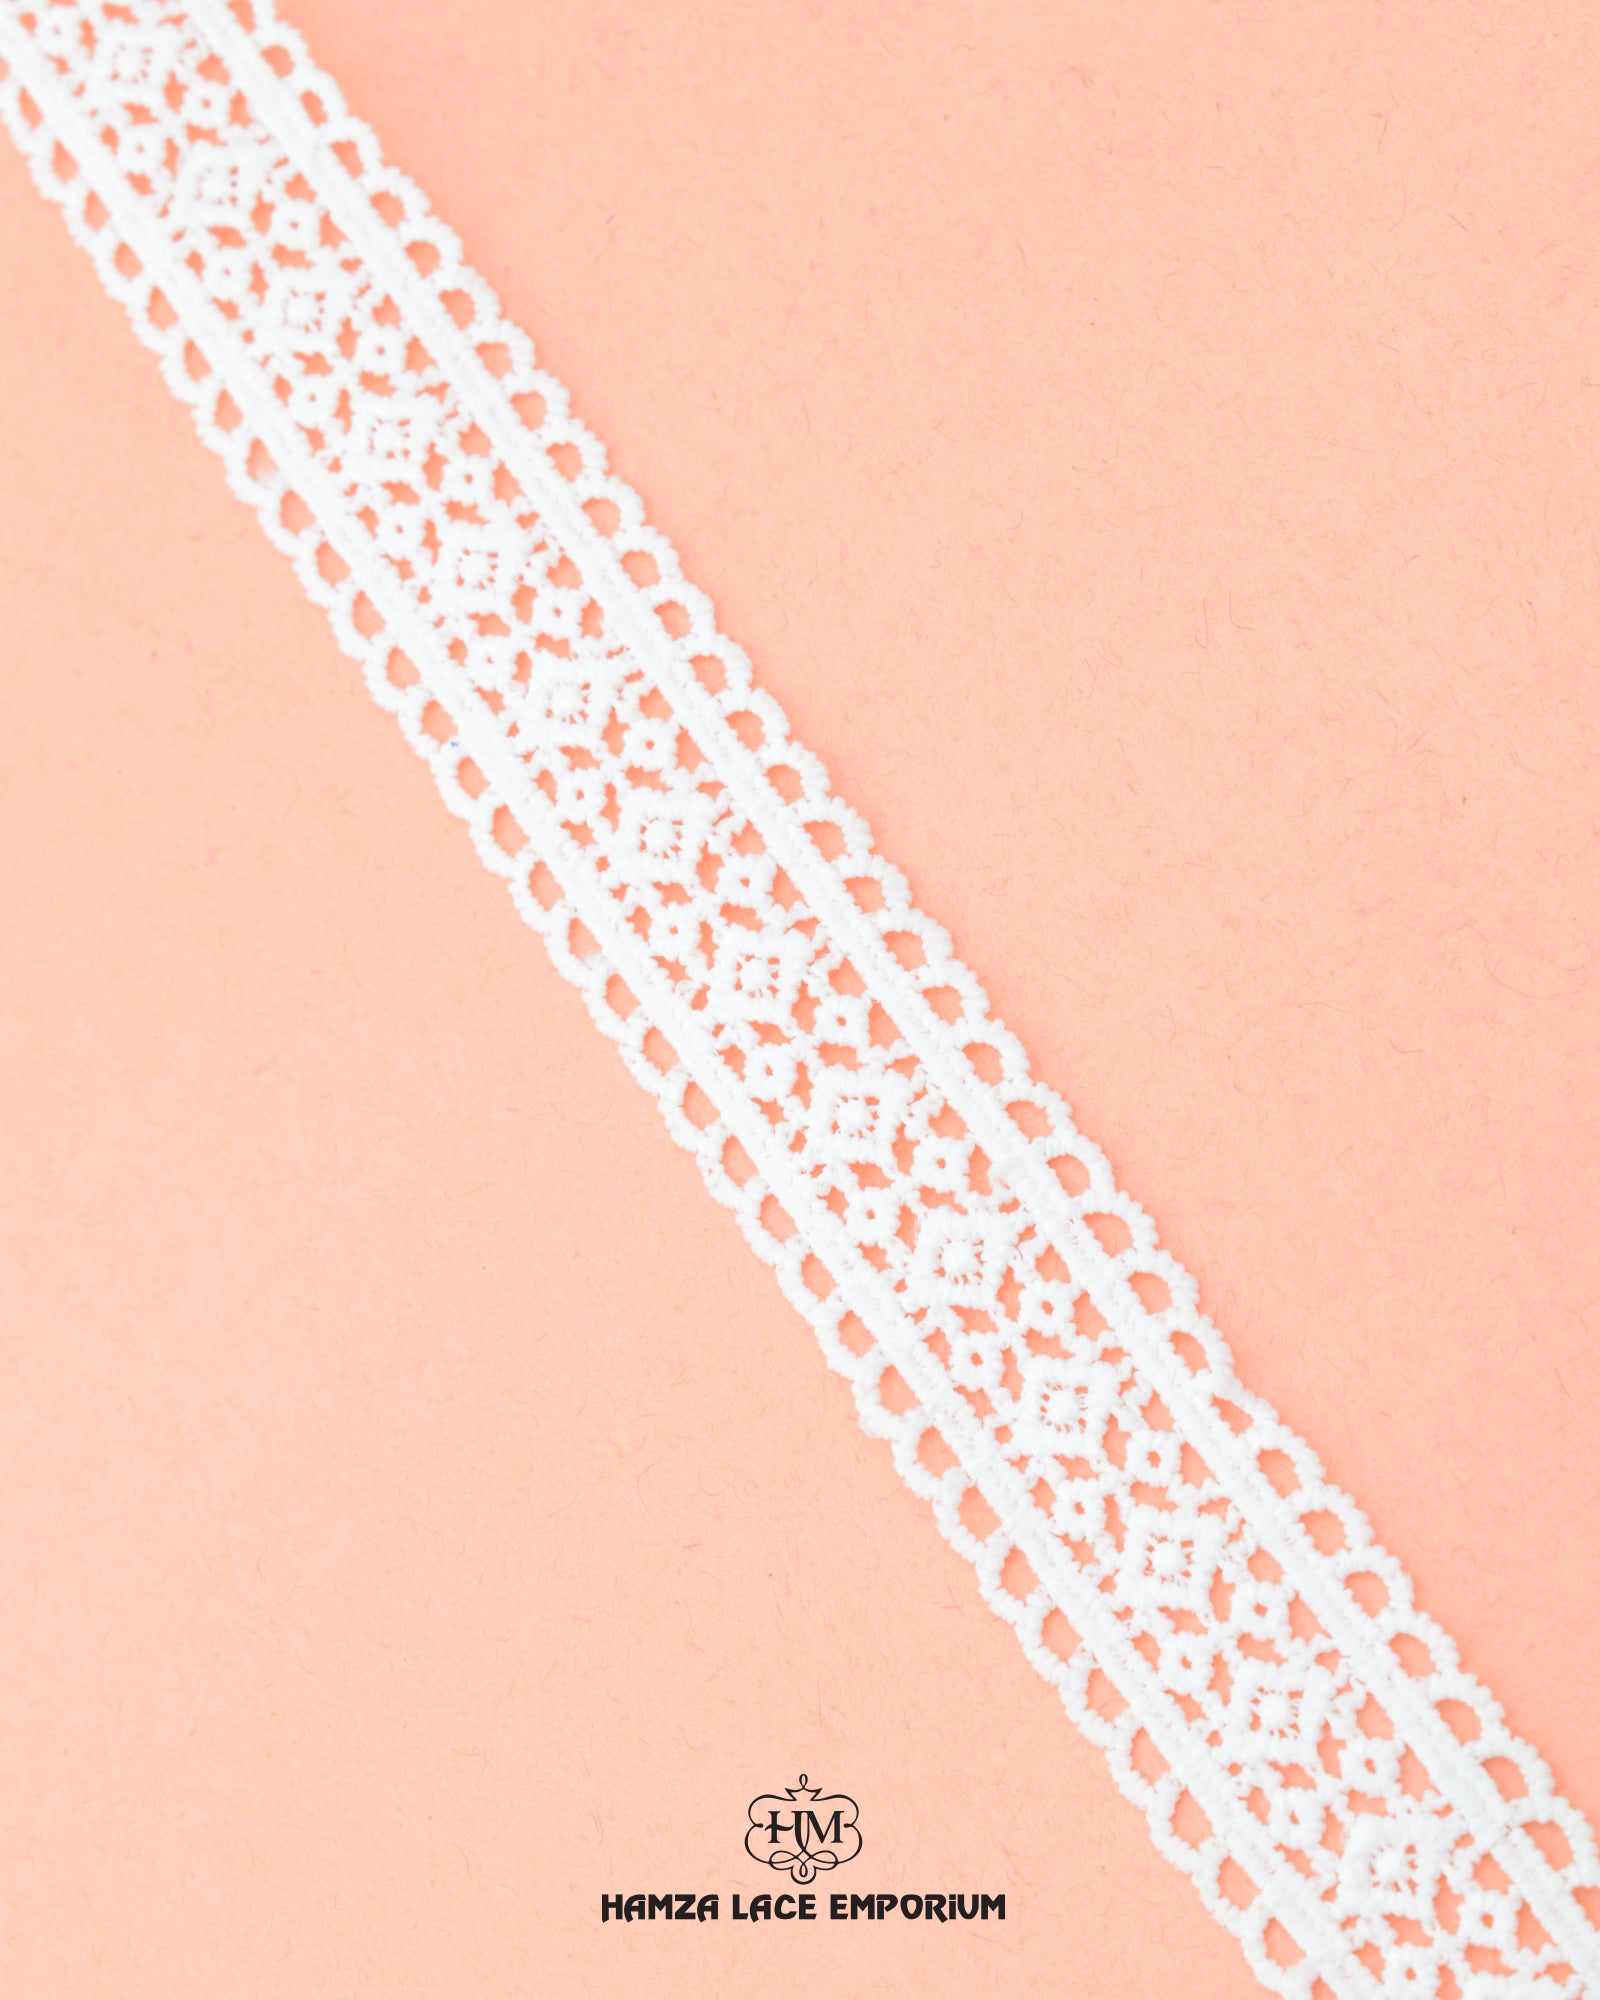 'Center Filling Lace 23421' is on a pink background and the Hamza Lace logo at the bottom